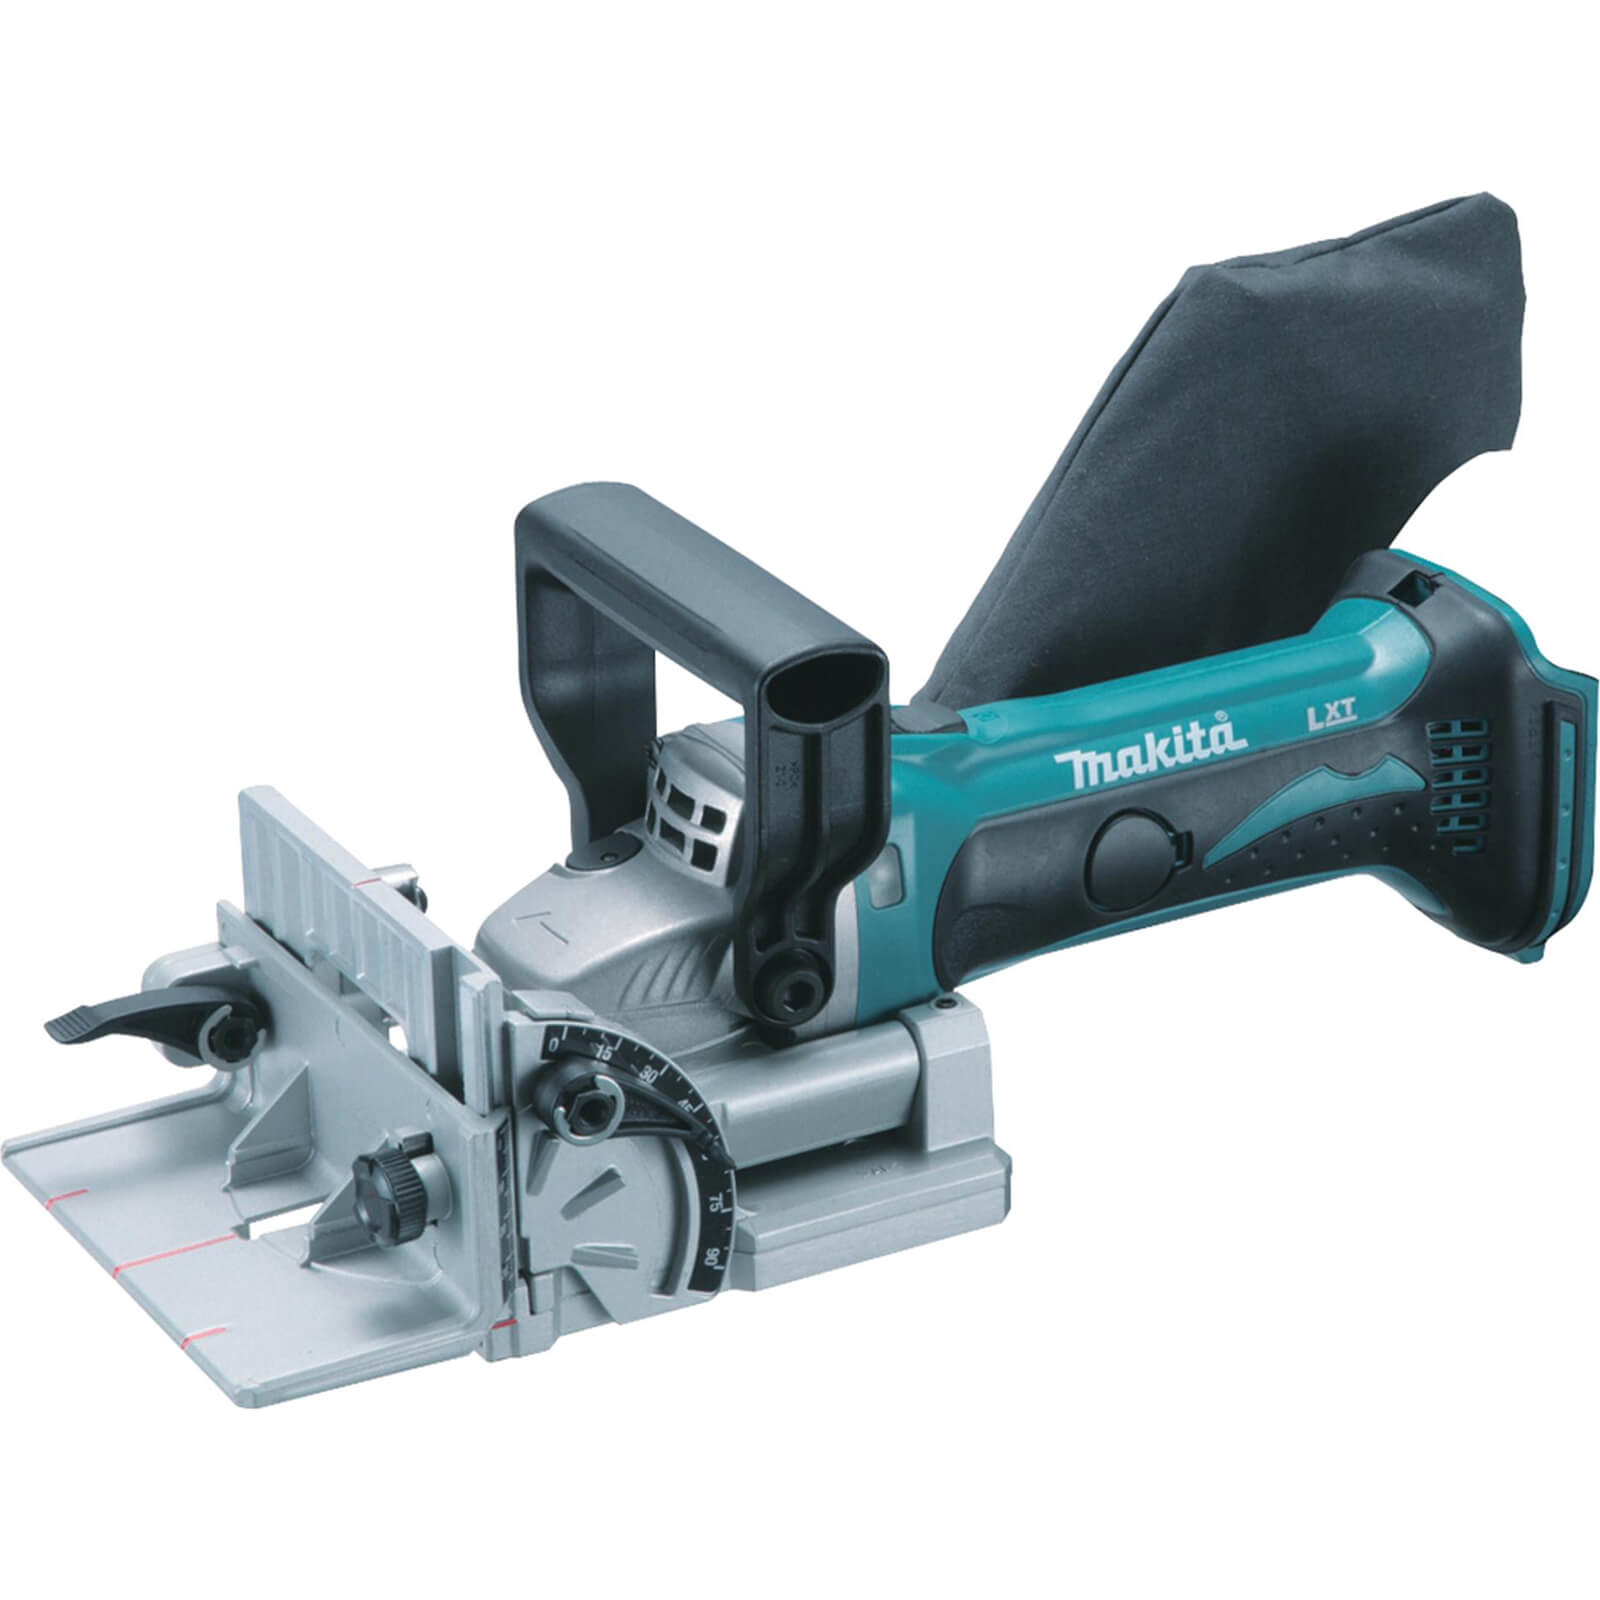 Makita DPJ180 18v Cordless LXT Biscuit Jointer No Batteries No Charger No Case